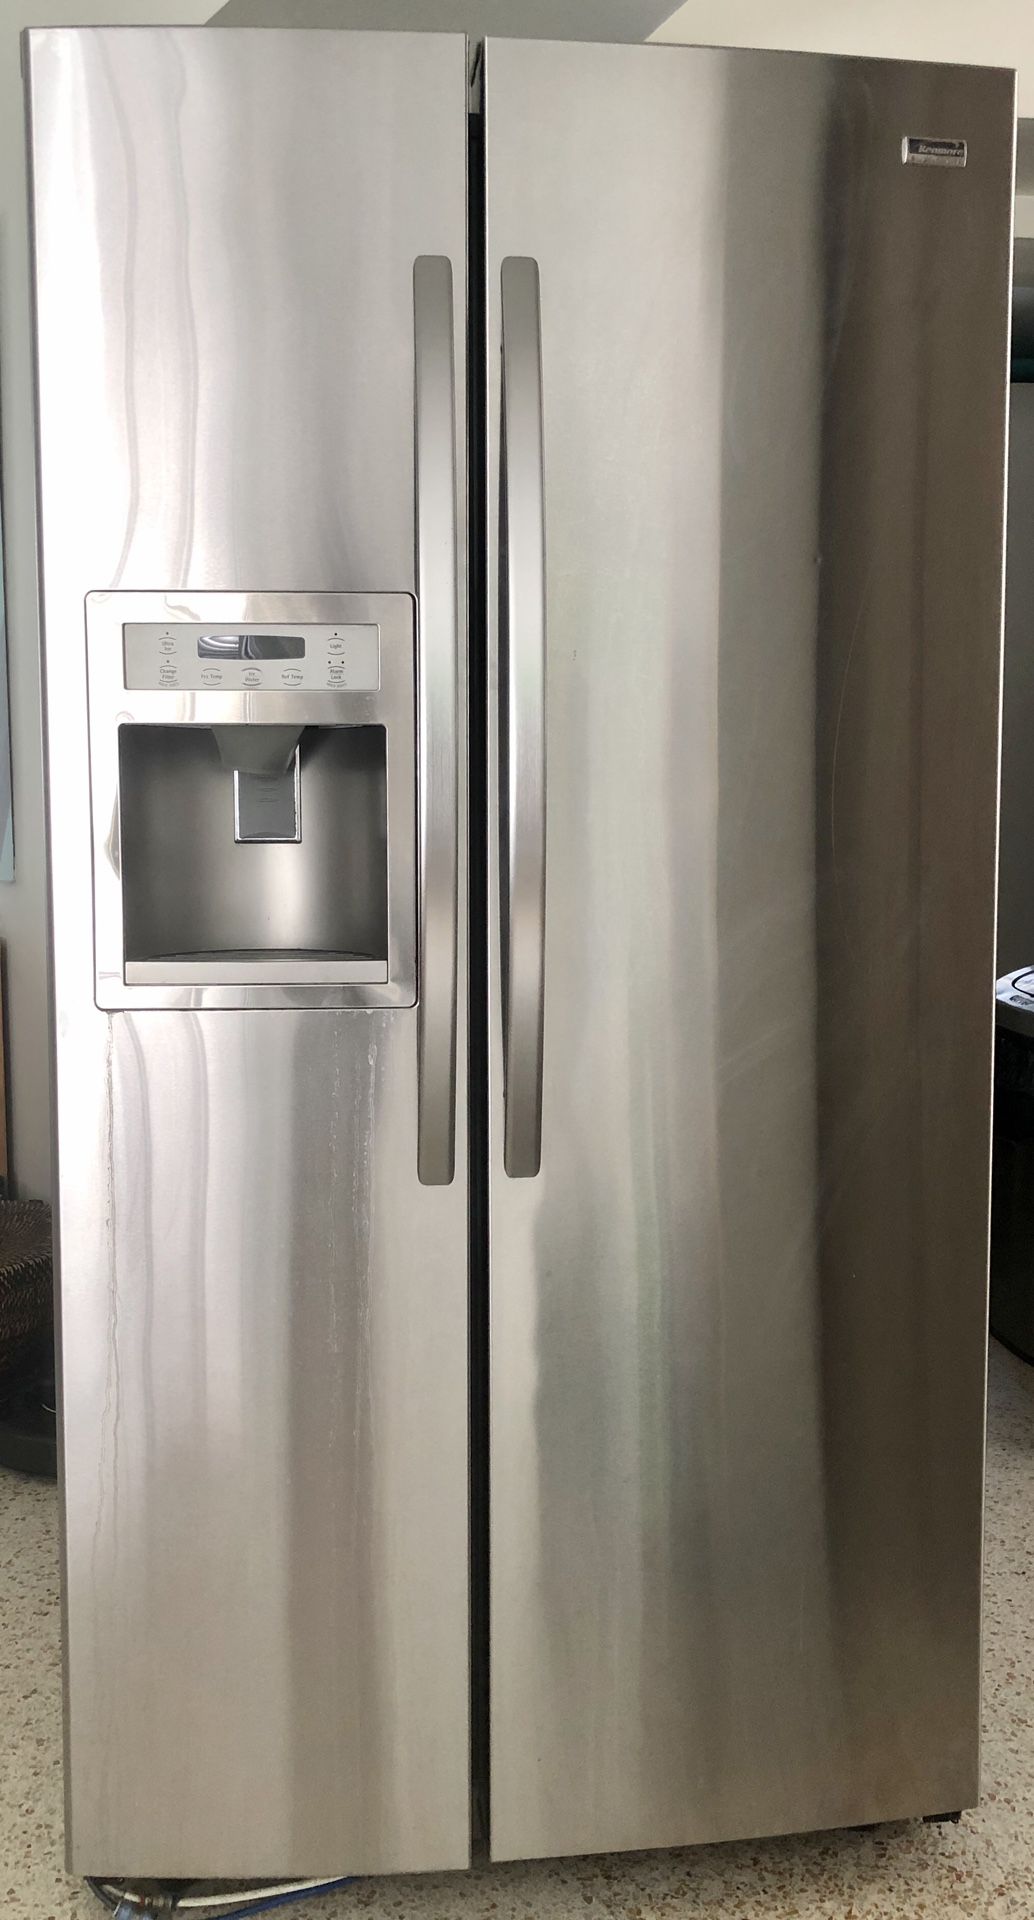 Kenmore Elite Refrigerator with Water and Ice dispenser - side by side doors